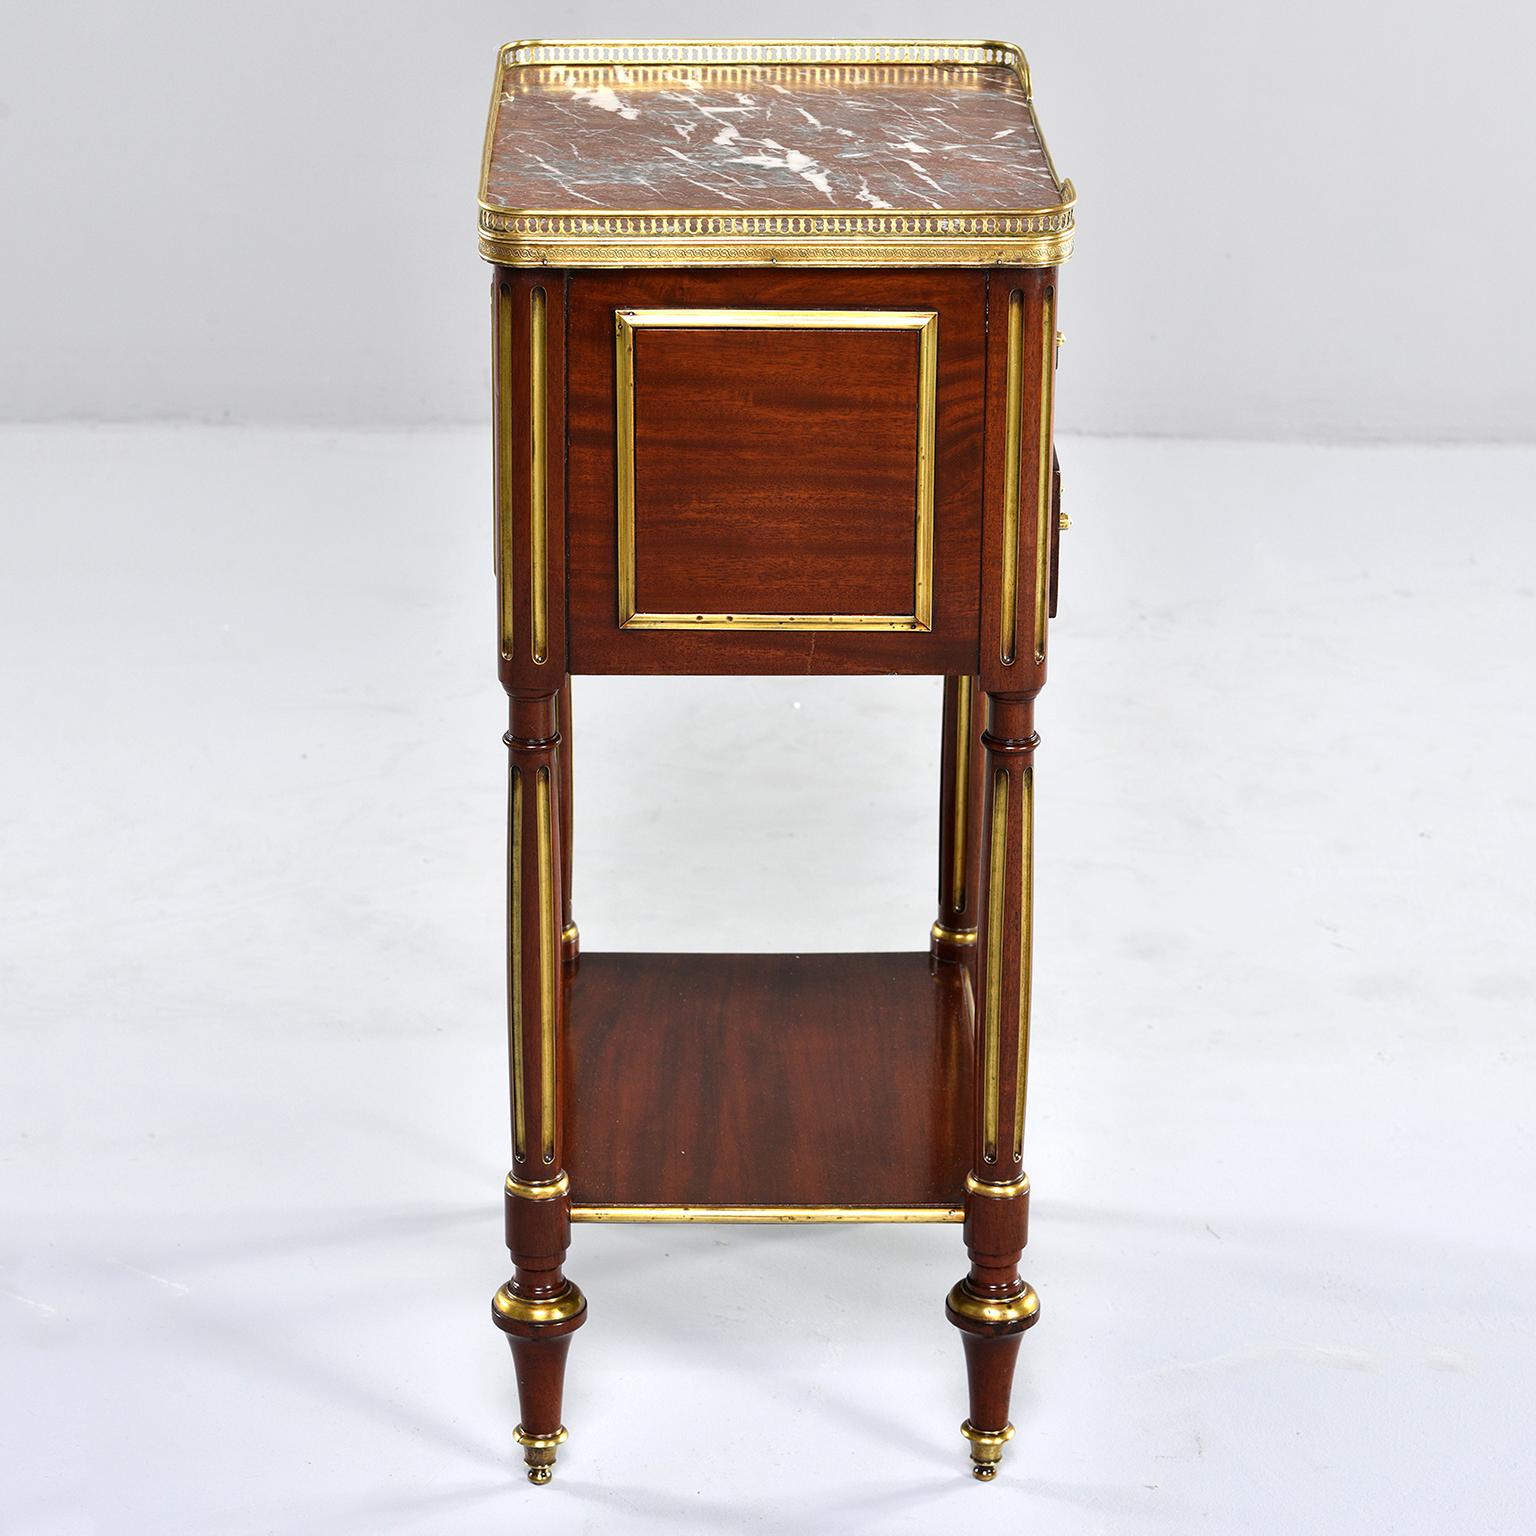 Louis XVI mahogany side cabinet has a marble top with brass gallery and two functional drawers with brass pulls, circa 1850s. Sides have brass trim, reeded legs have gilded details and turned feet.

Marble top has cracked corner - see detail photo.